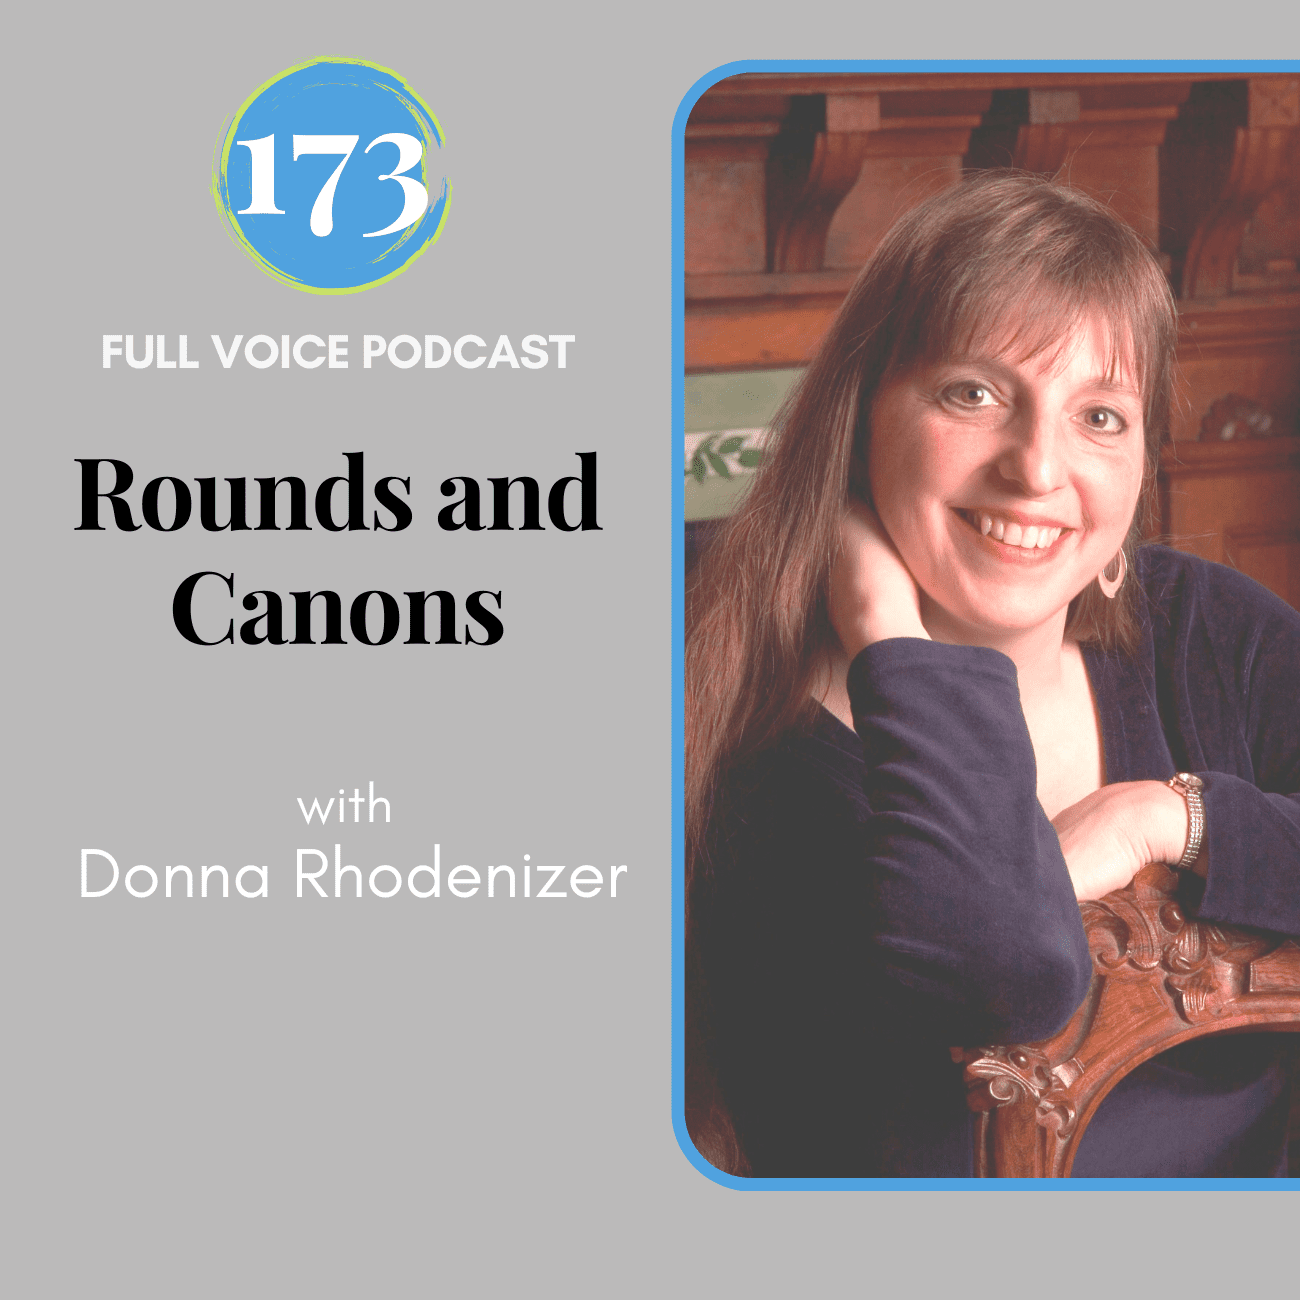 Episode 173 of the FULL VOICE podcast with Donna Rhodenizer